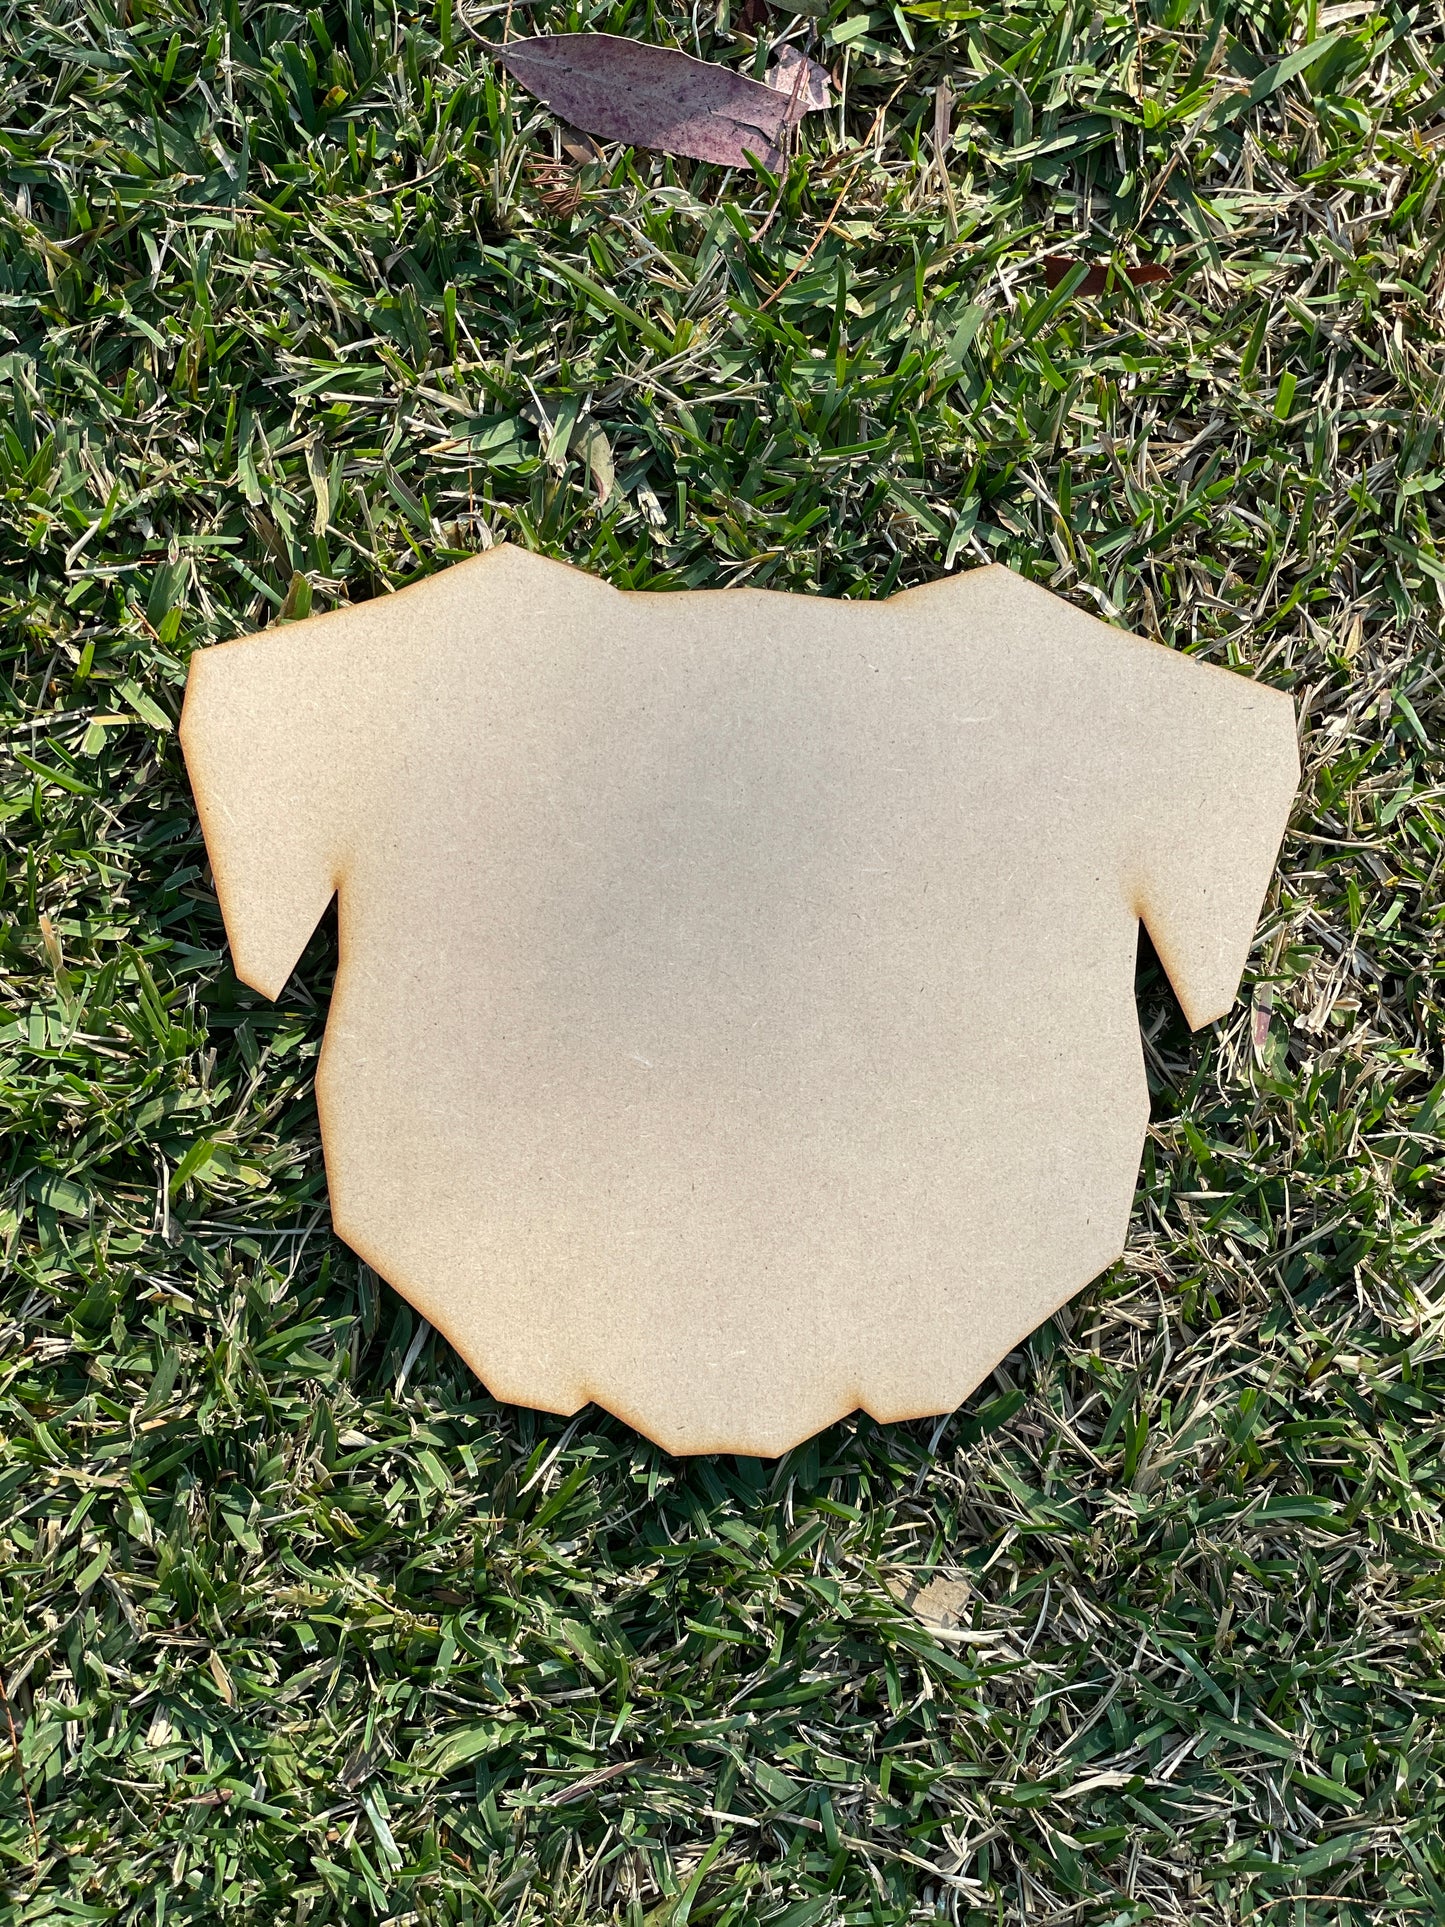 Geo Pug Head Backing Shape MDF Art Board, Resin Board, Art Blank, Craft Blank ~3mm/6mm/9mm thickness available~